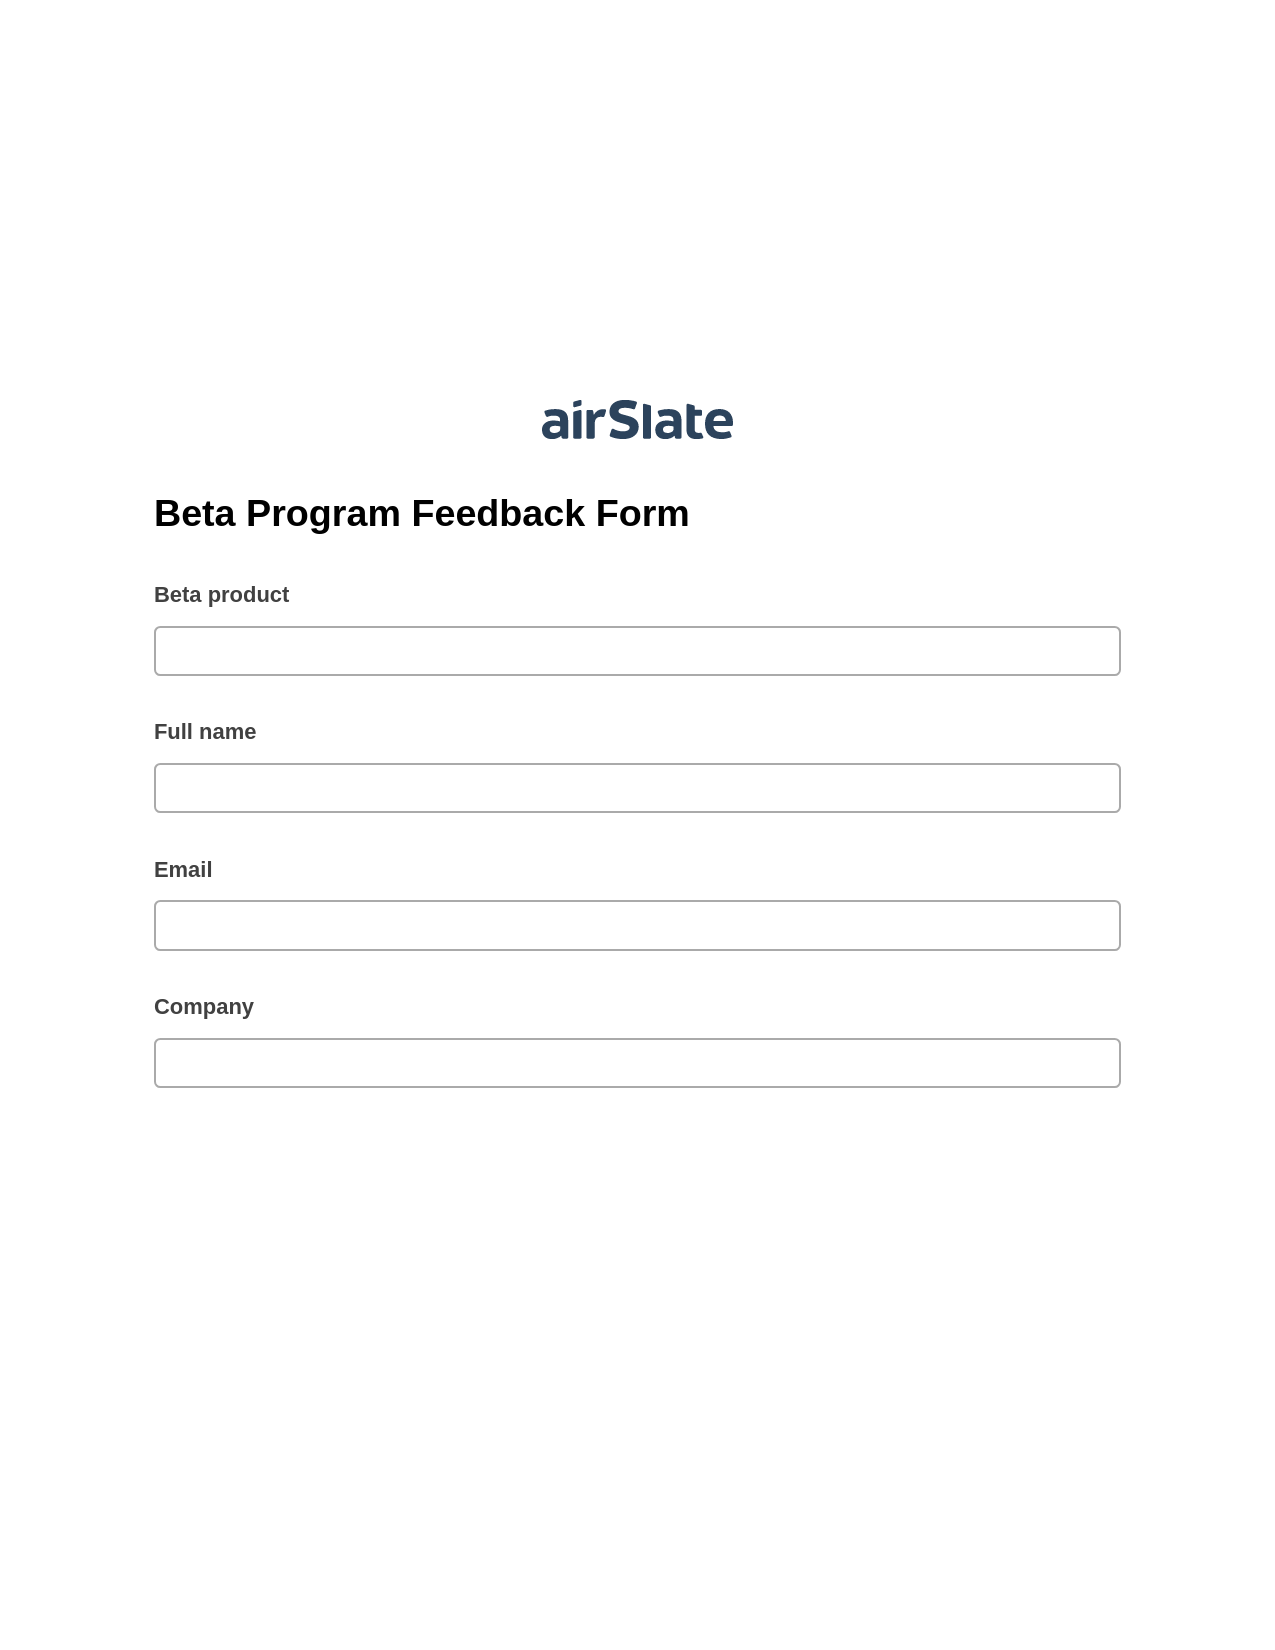 Multirole Beta Program Feedback Form Pre-fill Dropdowns from Google Sheet Bot, Update MS Dynamics 365 Records Bot, Export to Formstack Documents Bot